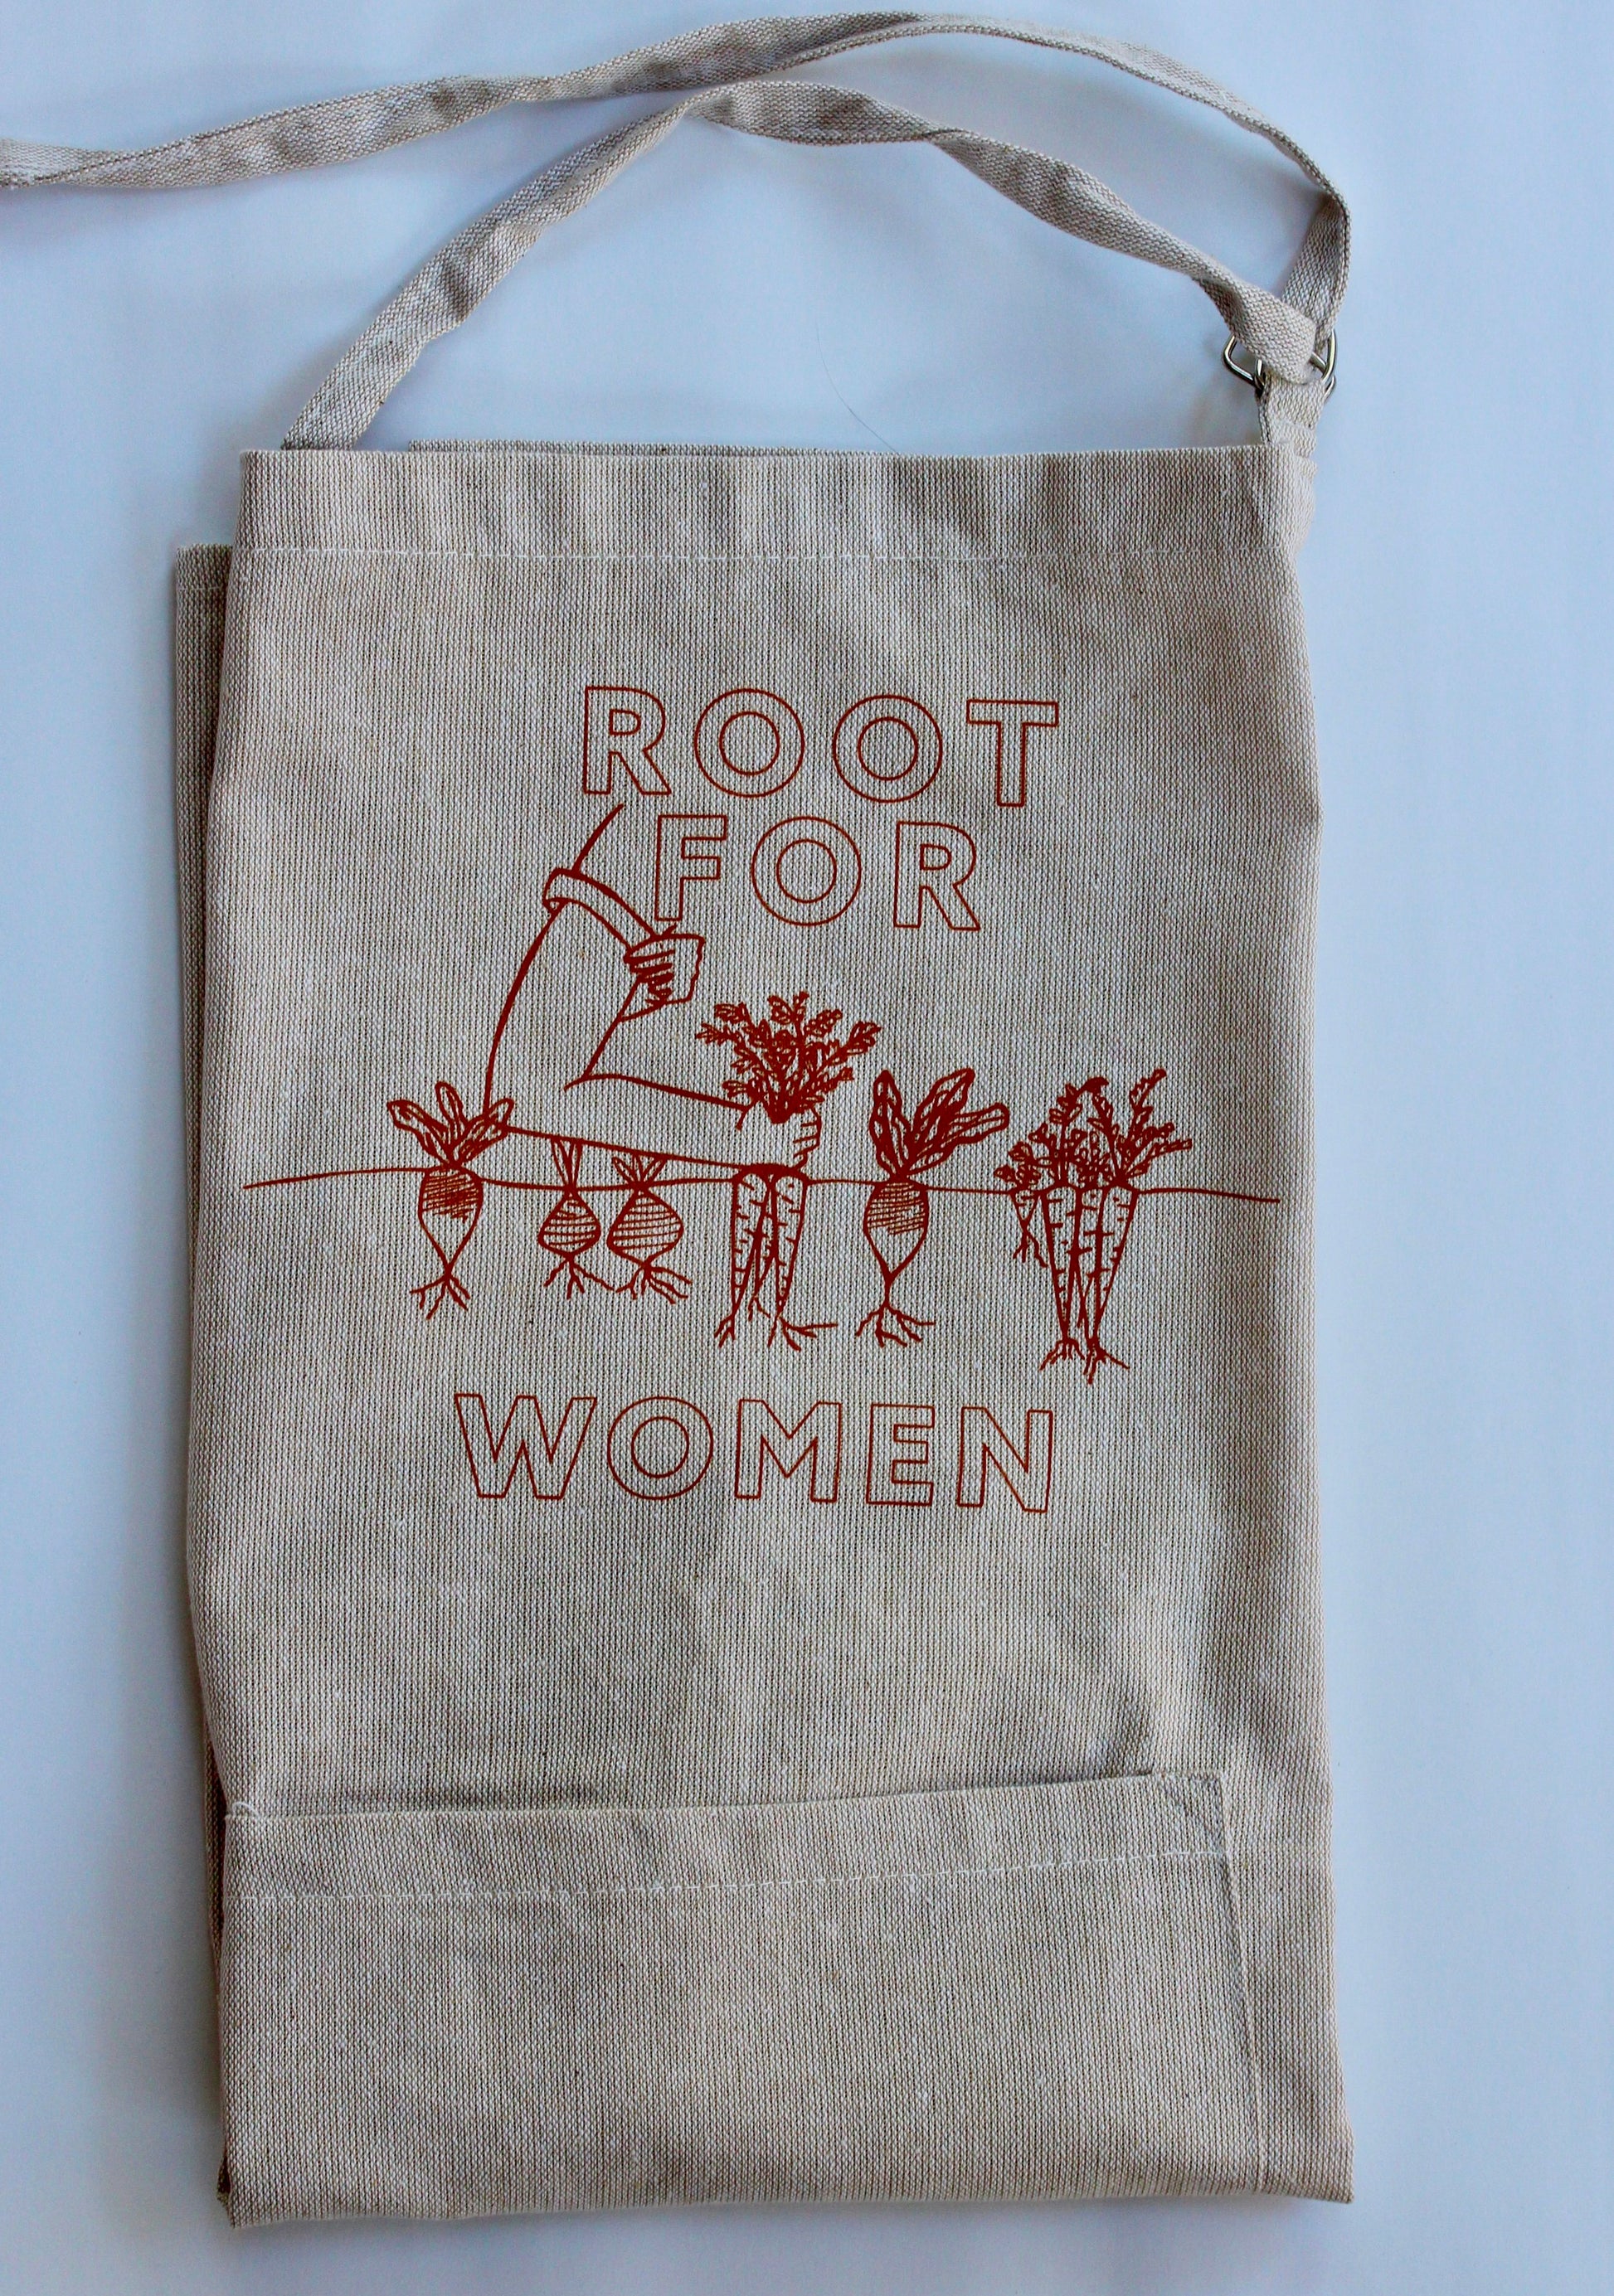 A natural color chambray apron reads "Root for Women" in carrot orange with a garden illustration 